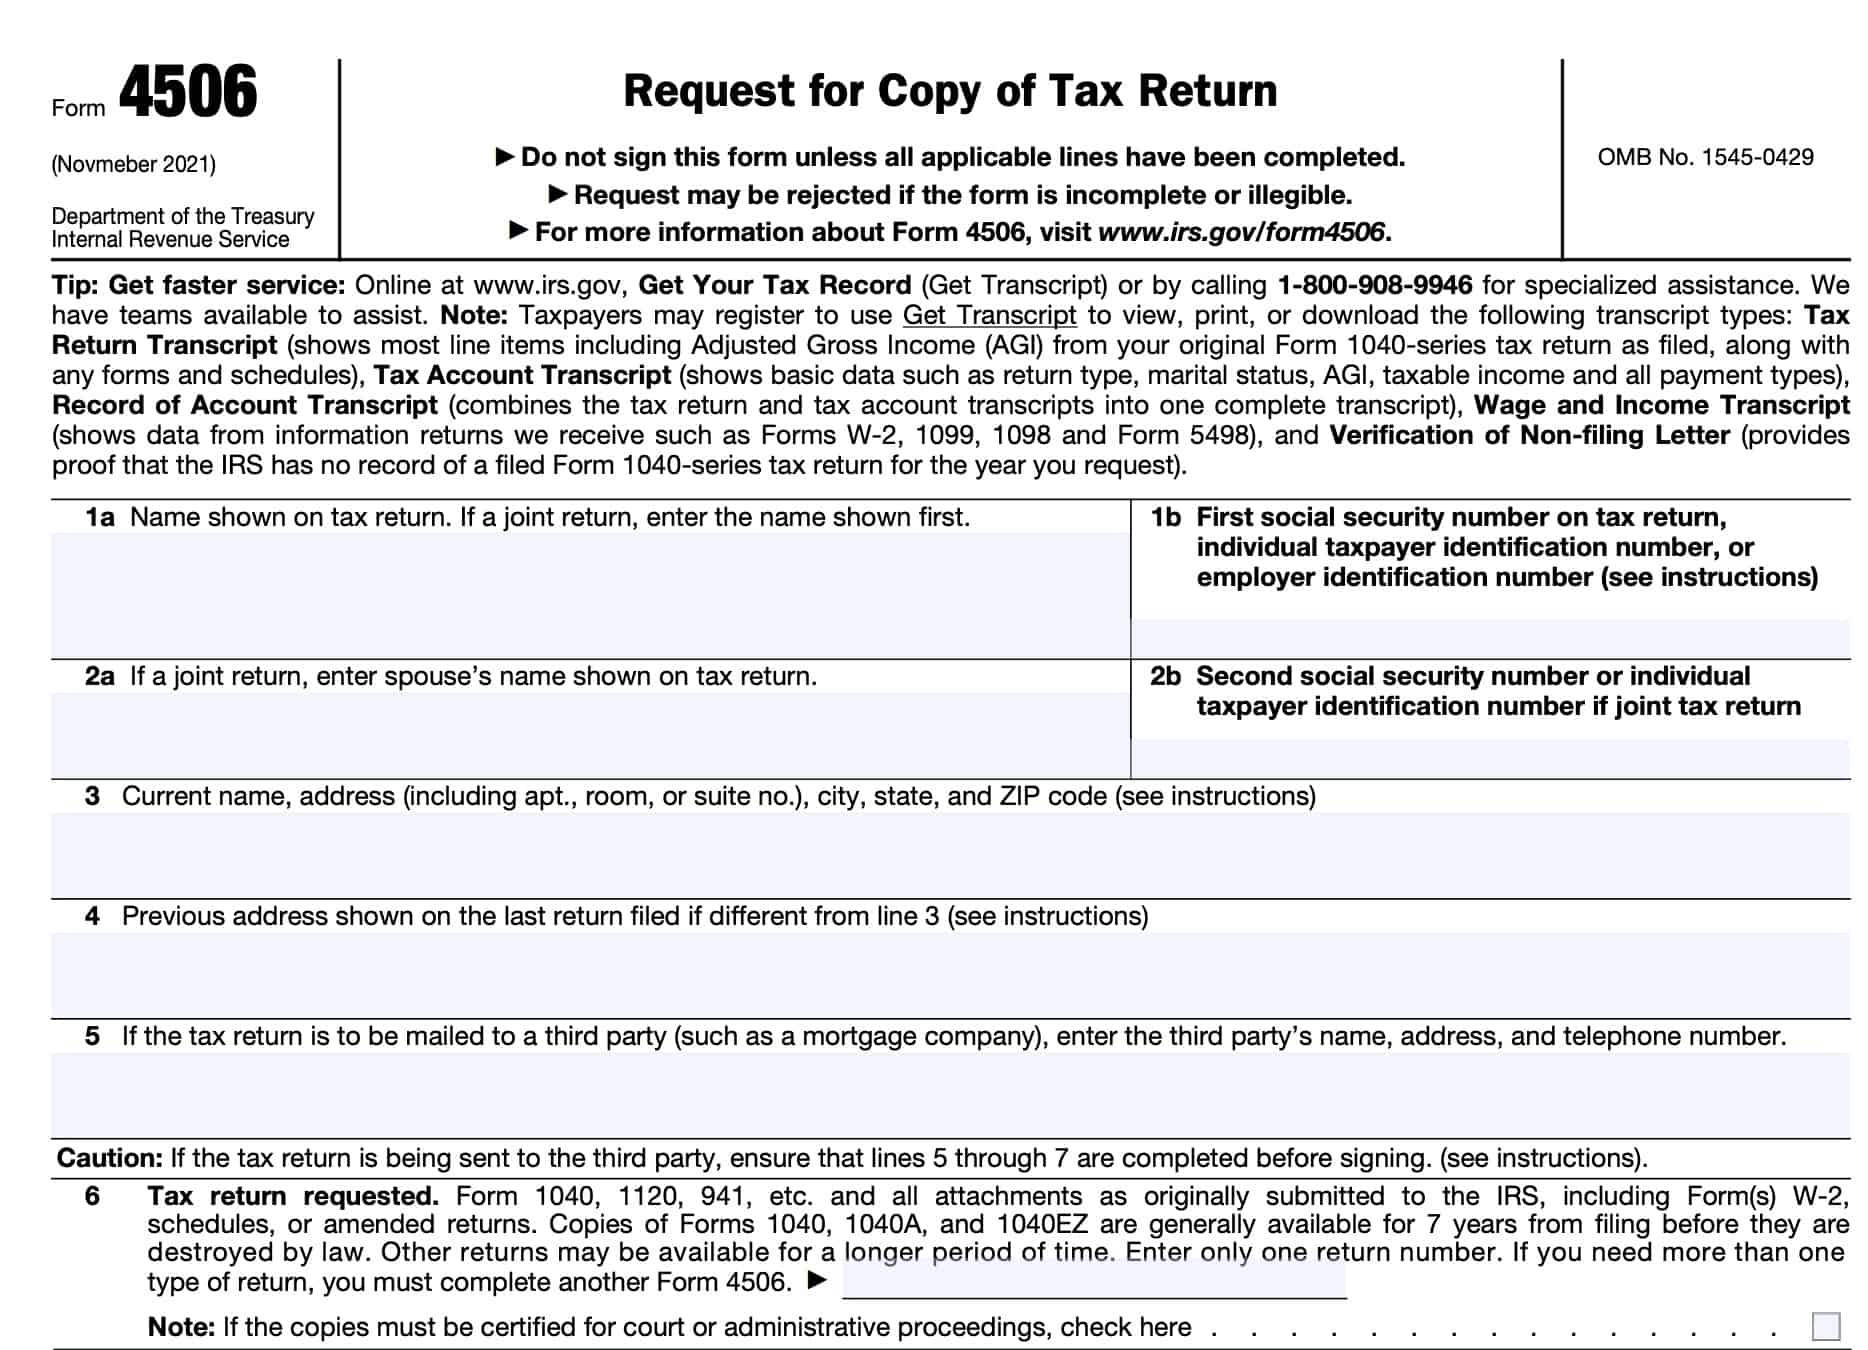 irs form 4506, lines 1-6